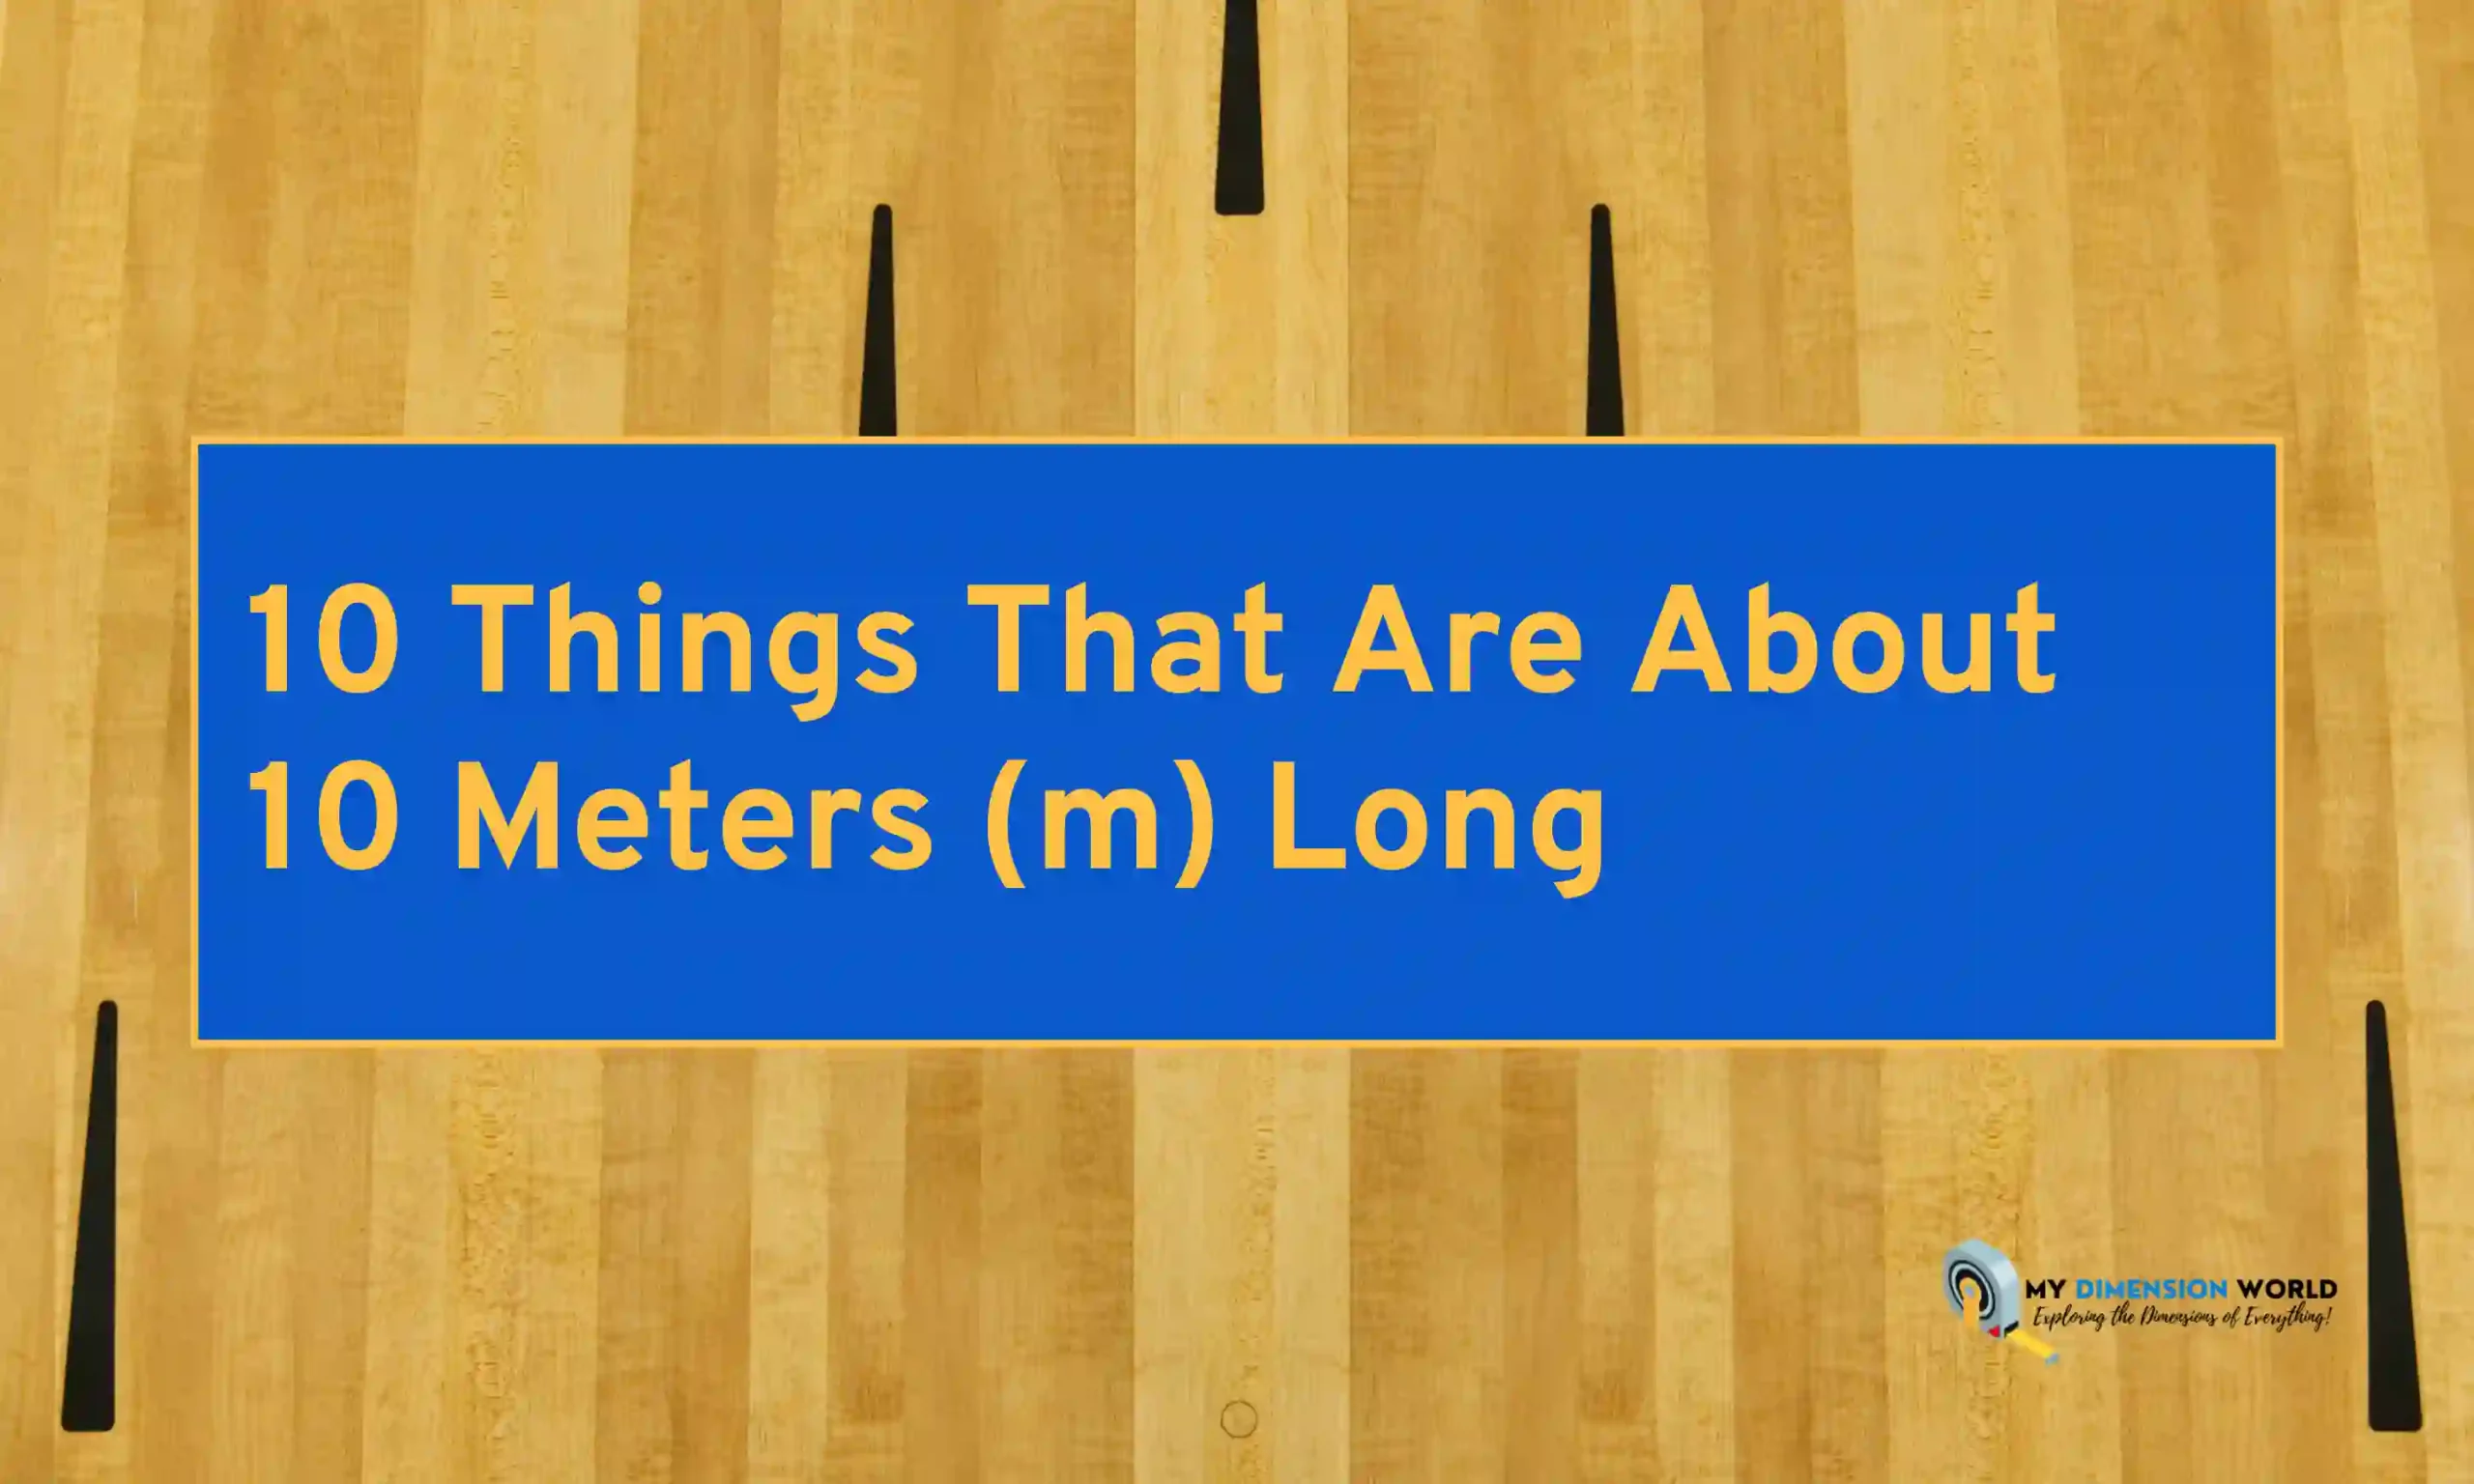 10 Things That Are About 10 Meters (m) Long